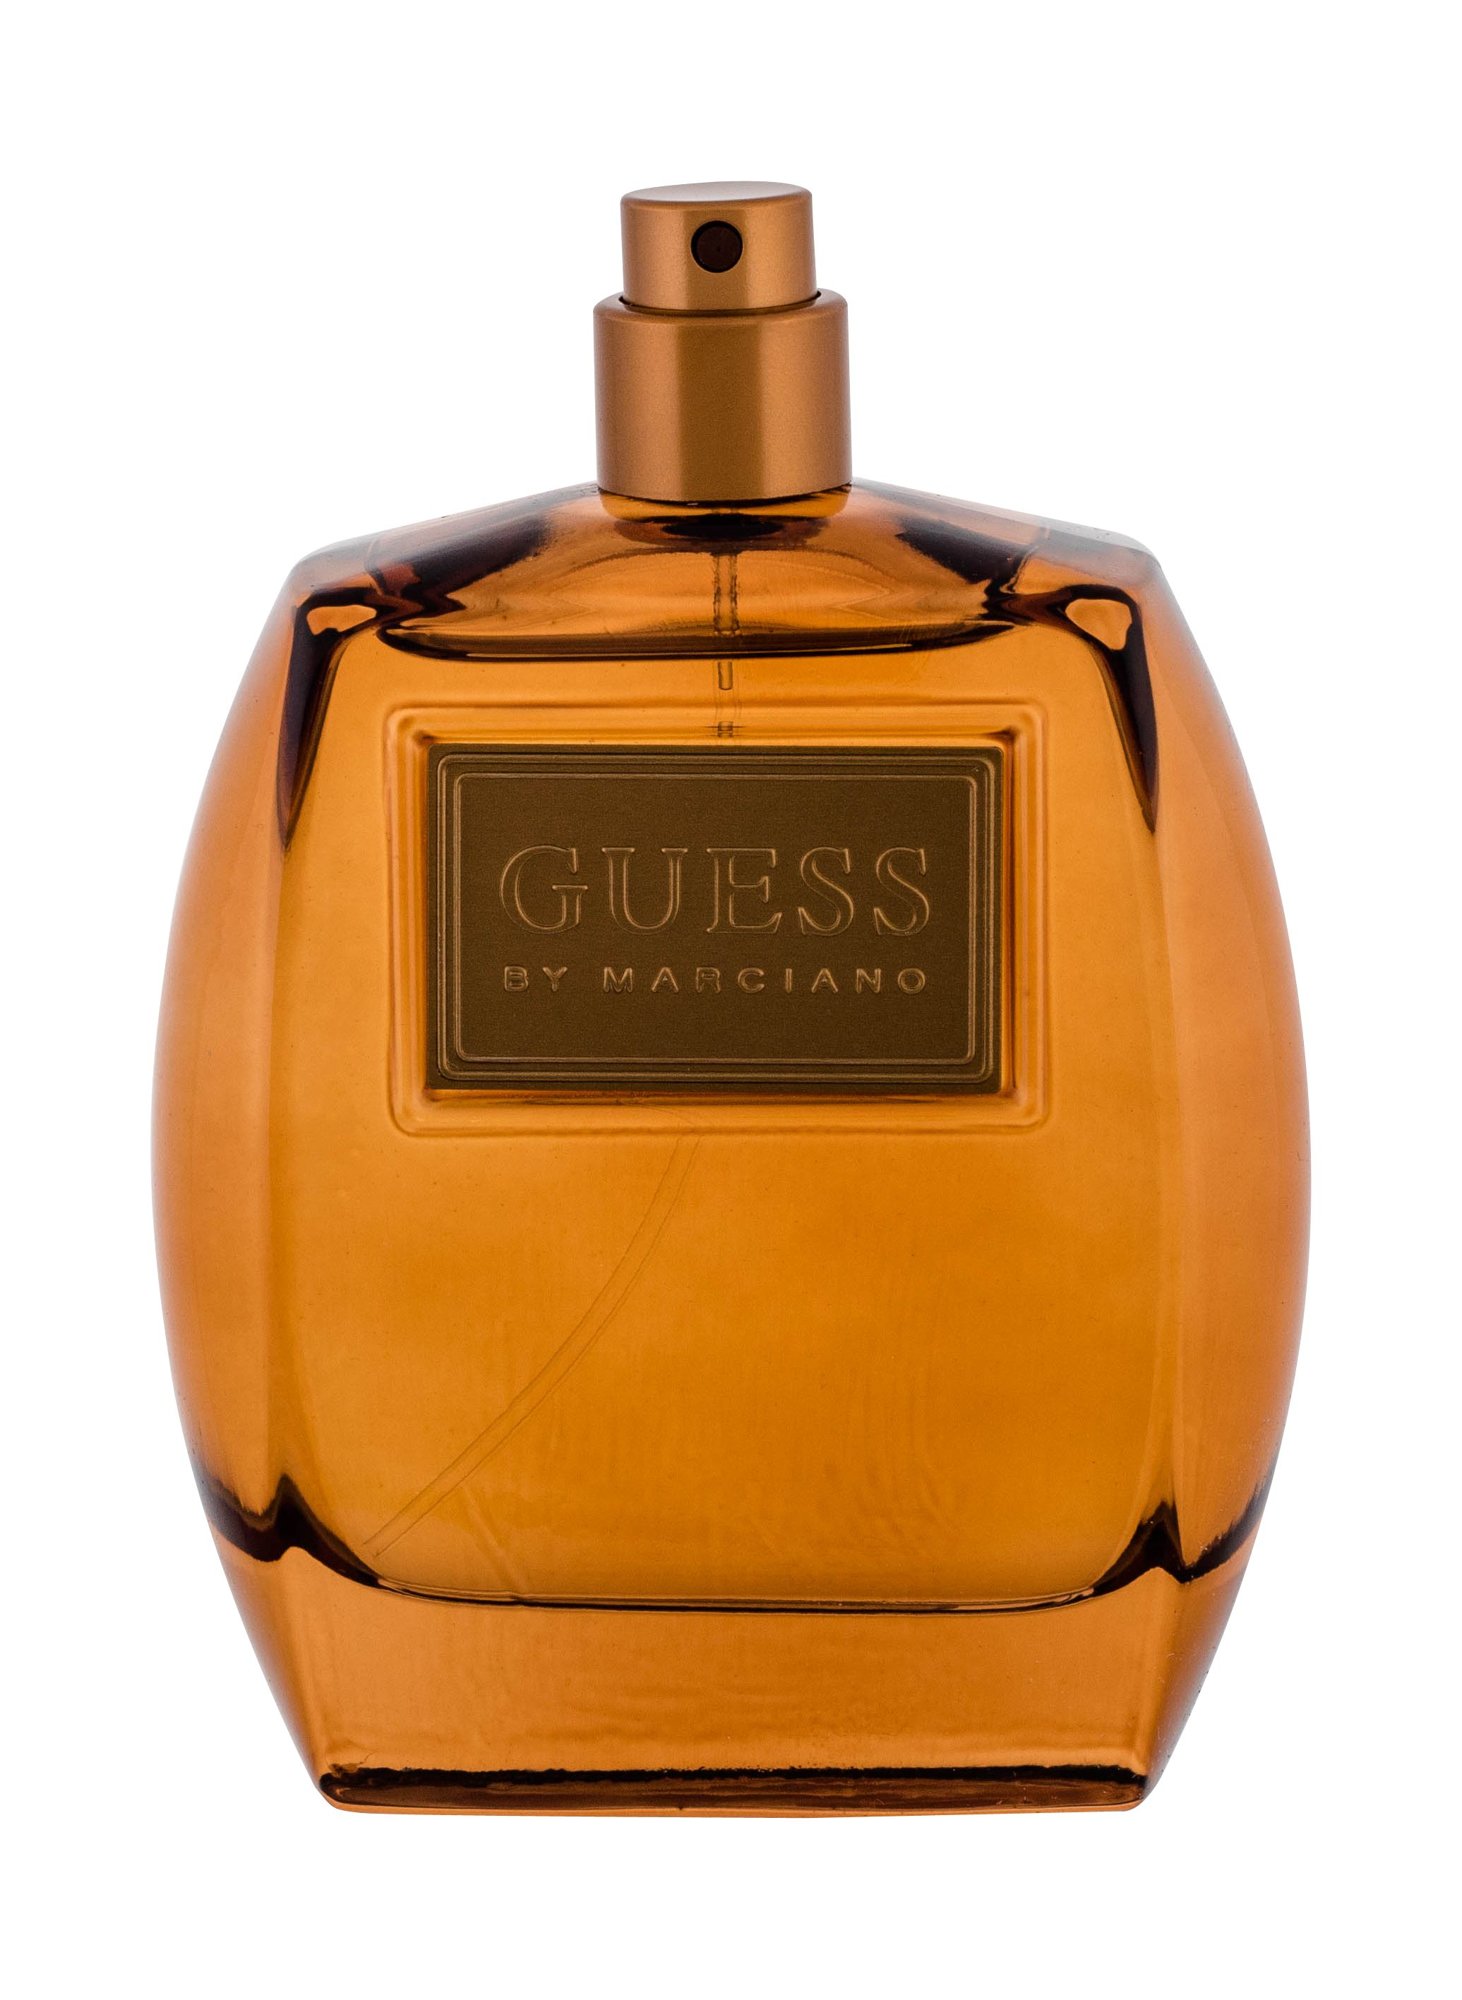 Guess Guess by Marciano For Men 100ml Kvepalai Vyrams EDT Testeris